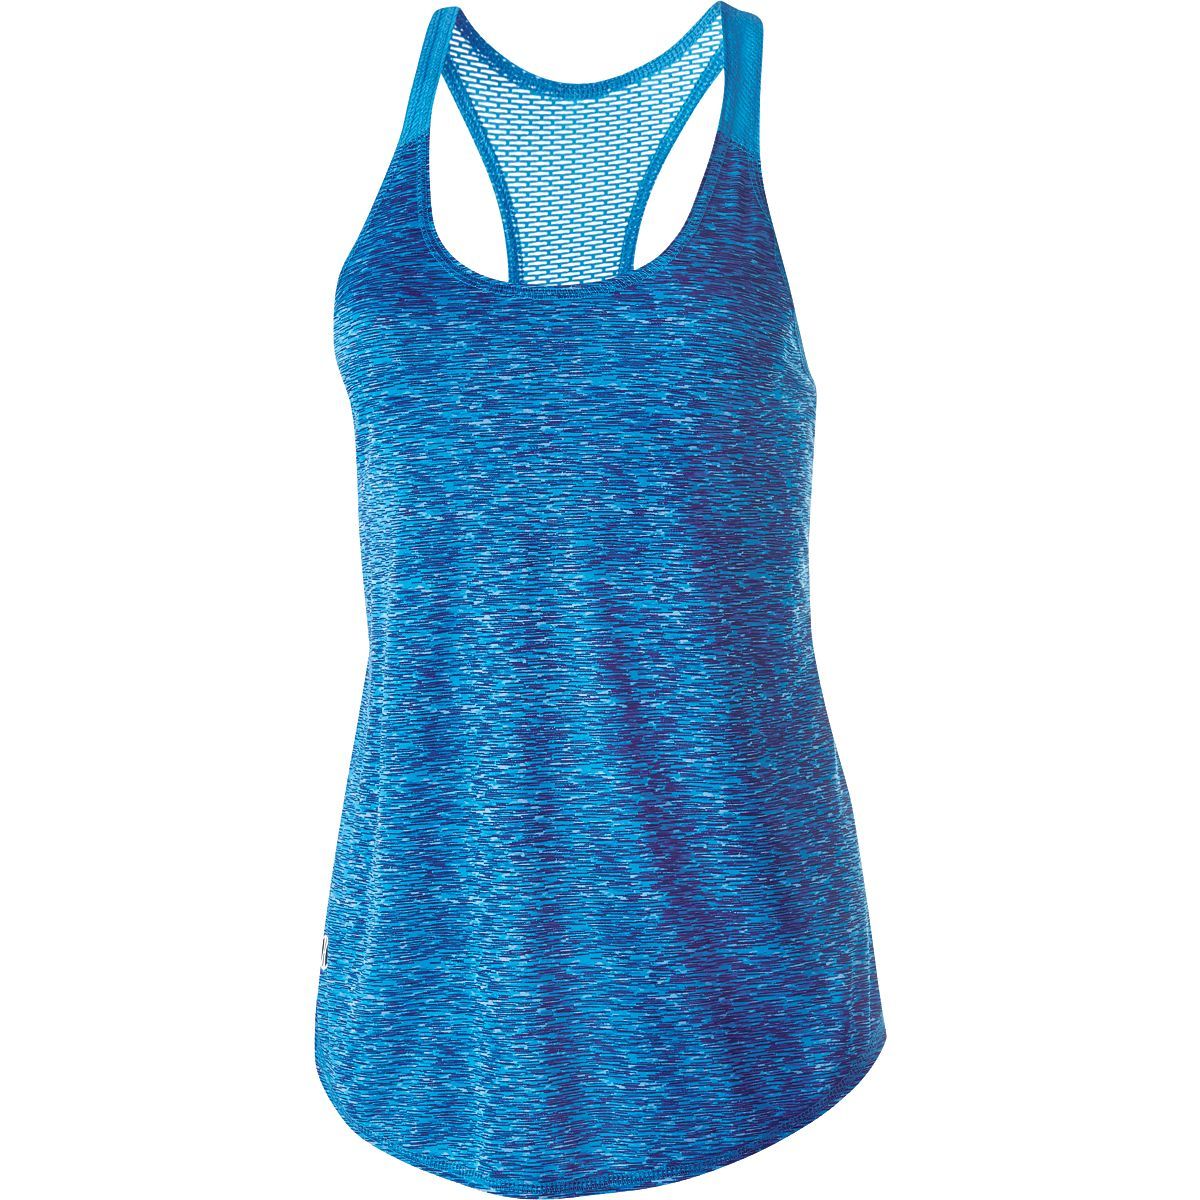 Holloway Ladies Space Dye Tank in Blue/Bright Blue  -Part of the Ladies, Ladies-Tank, Holloway, Shirts product lines at KanaleyCreations.com